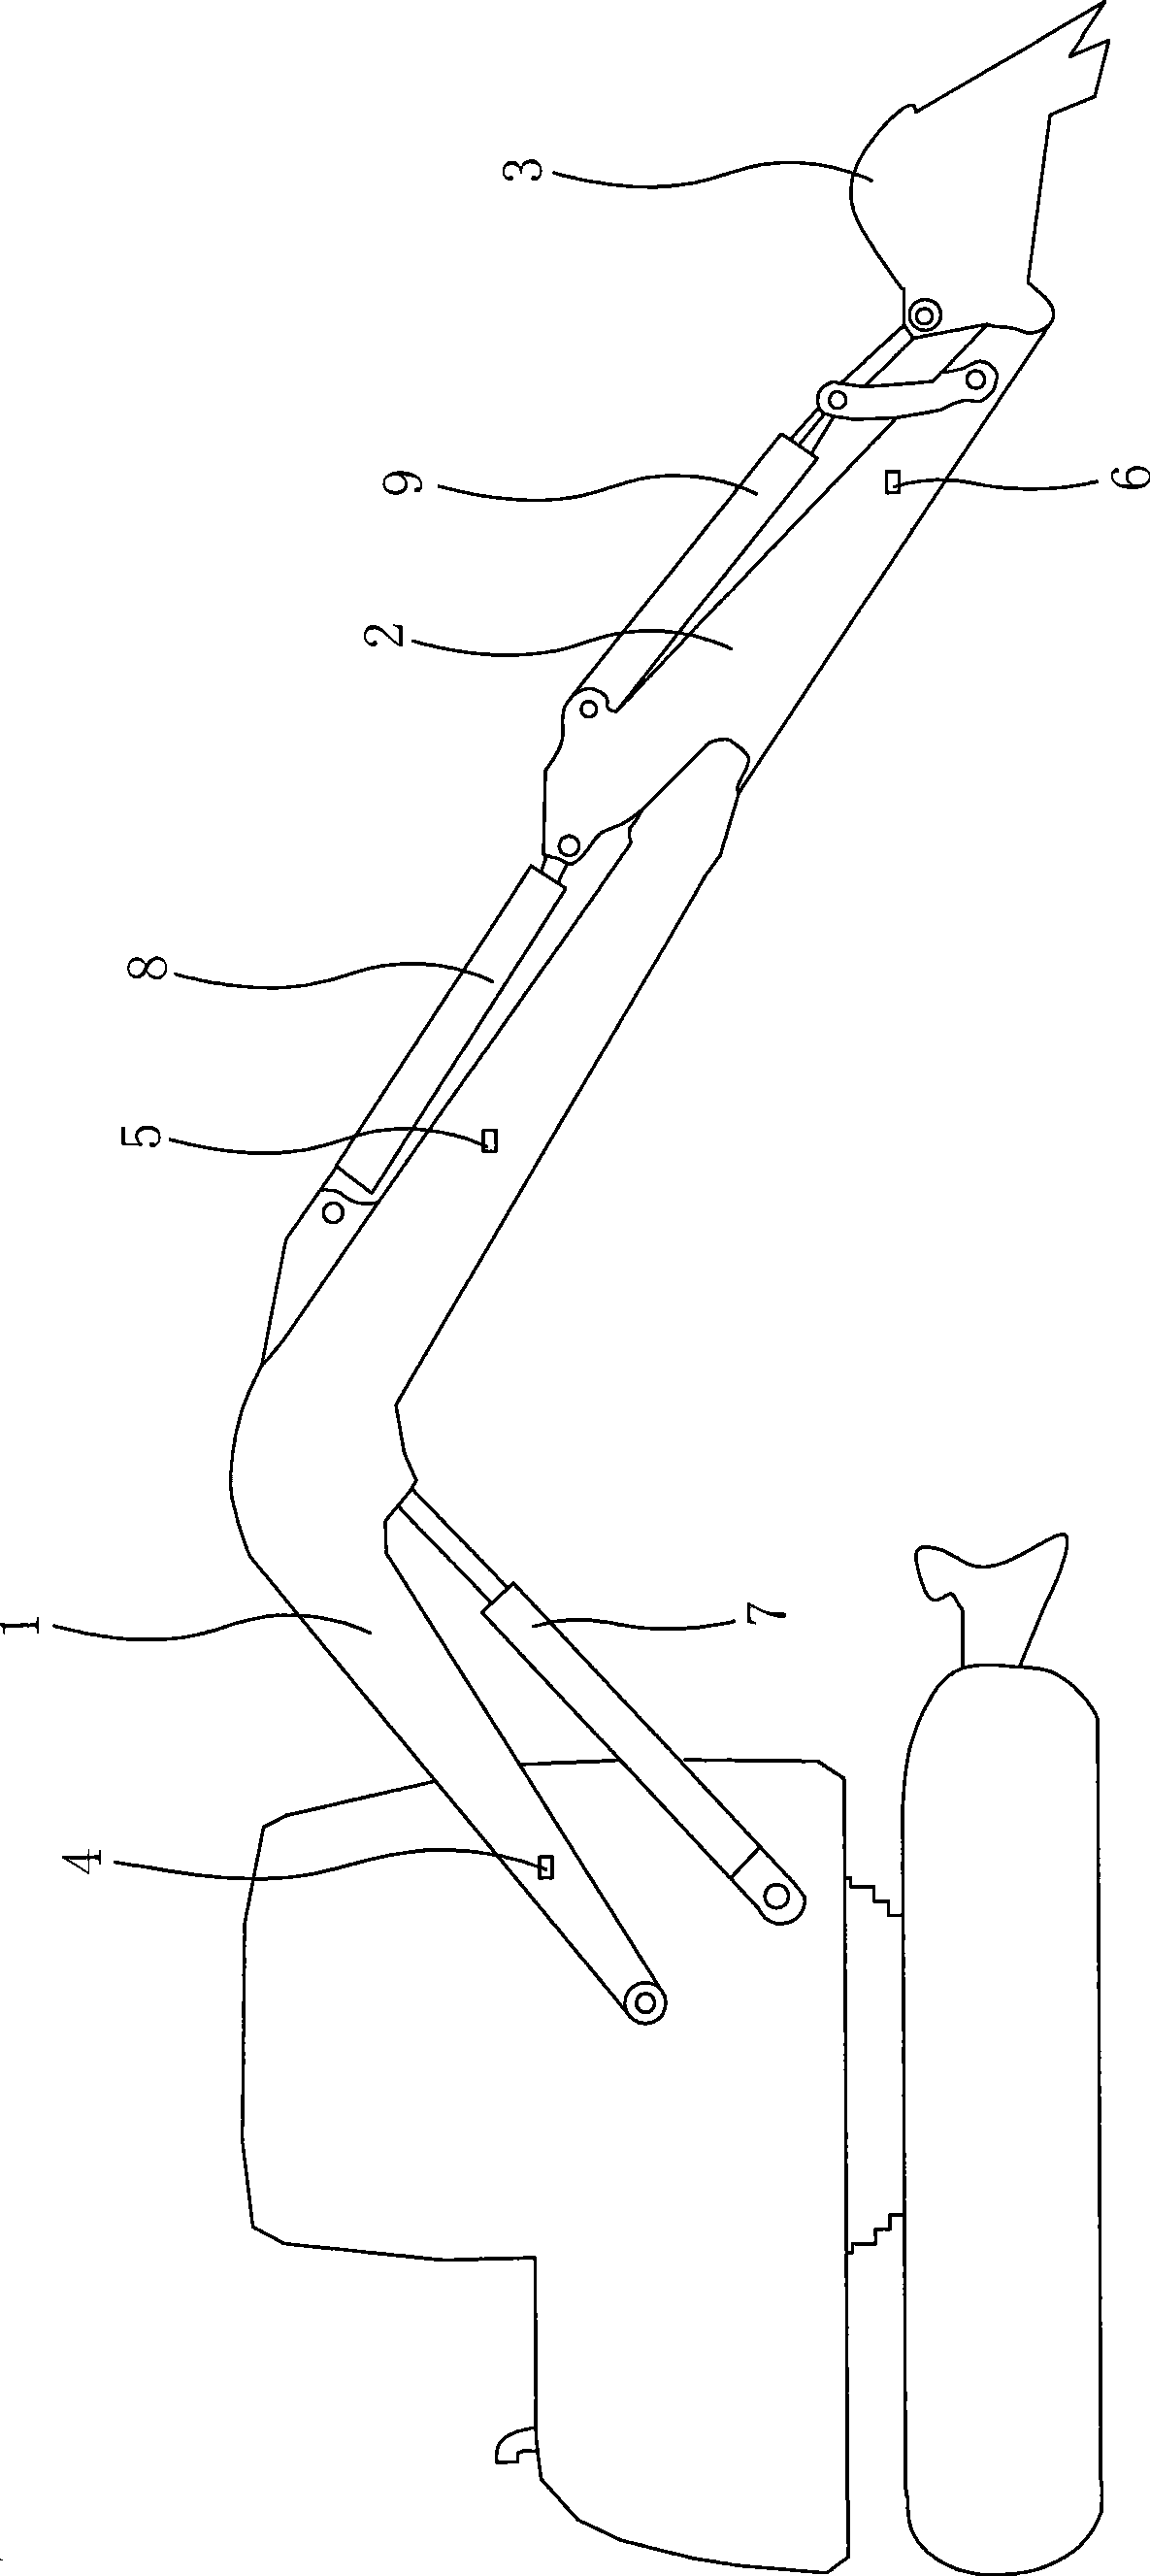 Control method and control device for hydraulic shovel scraper bucket